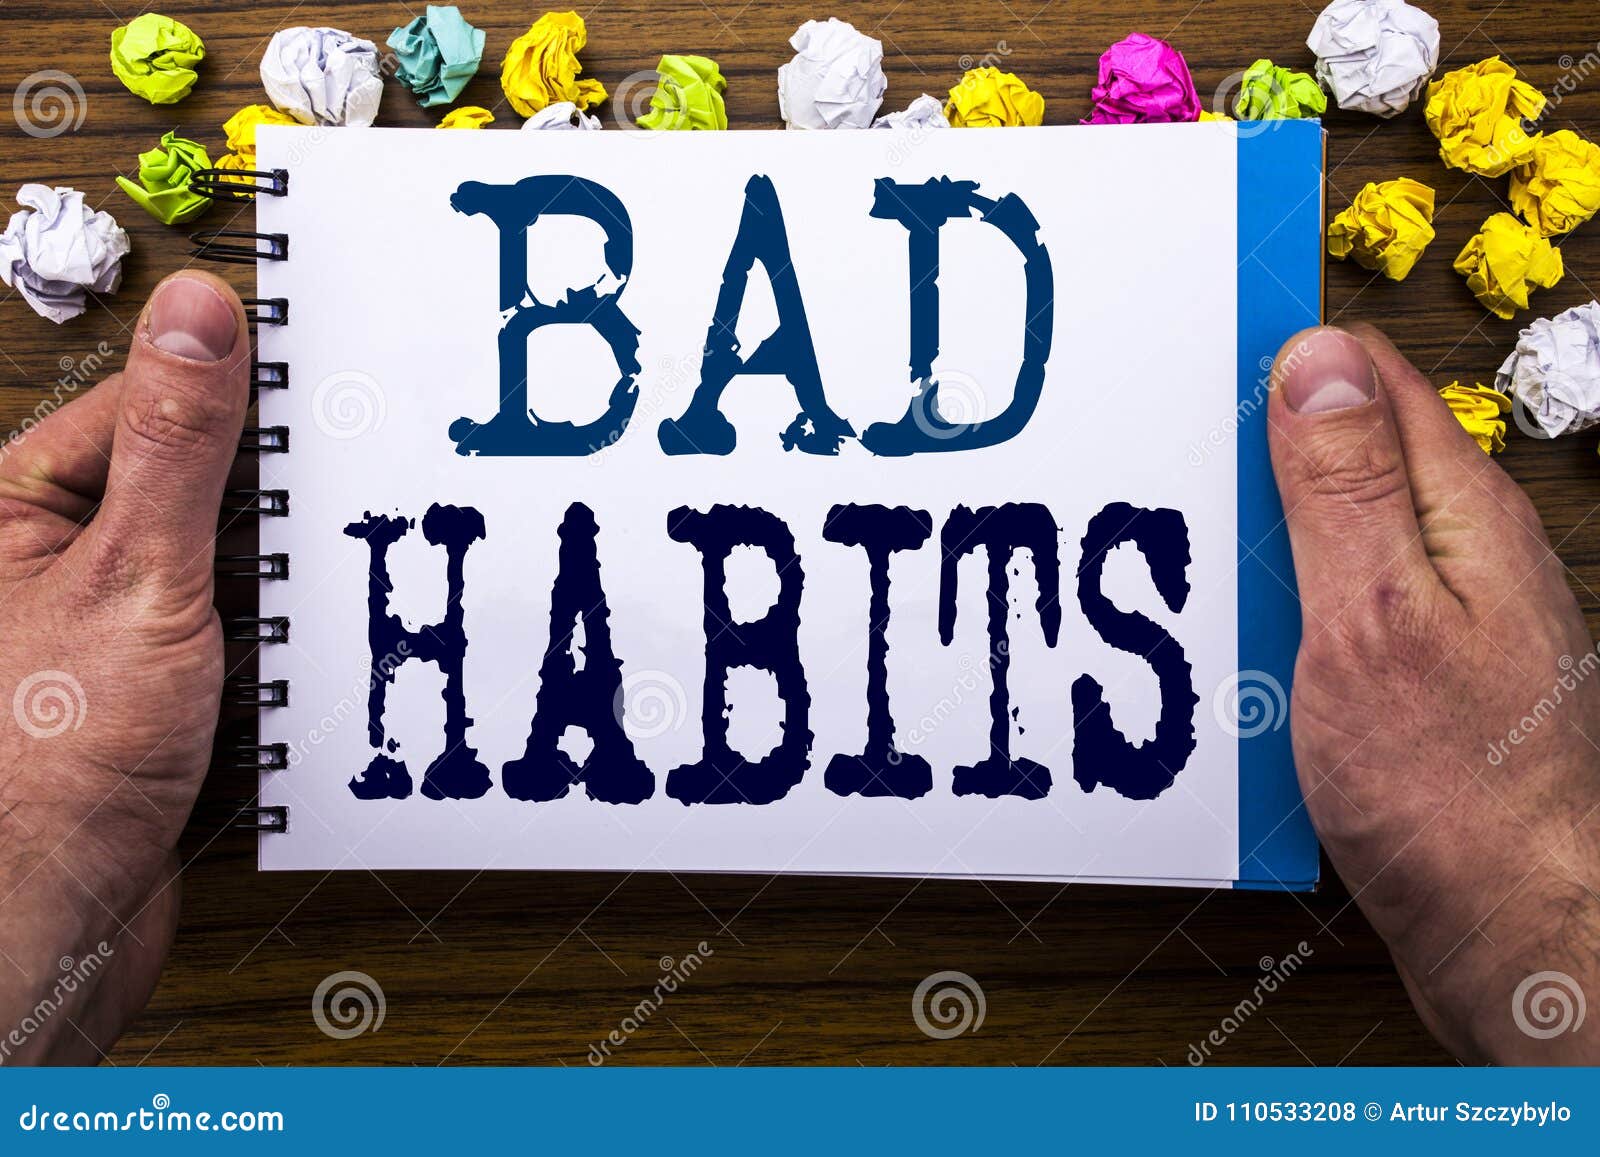 writing text showing bad habits. business concept for improvement break habitual hebit written on notepad notebook book on the woo